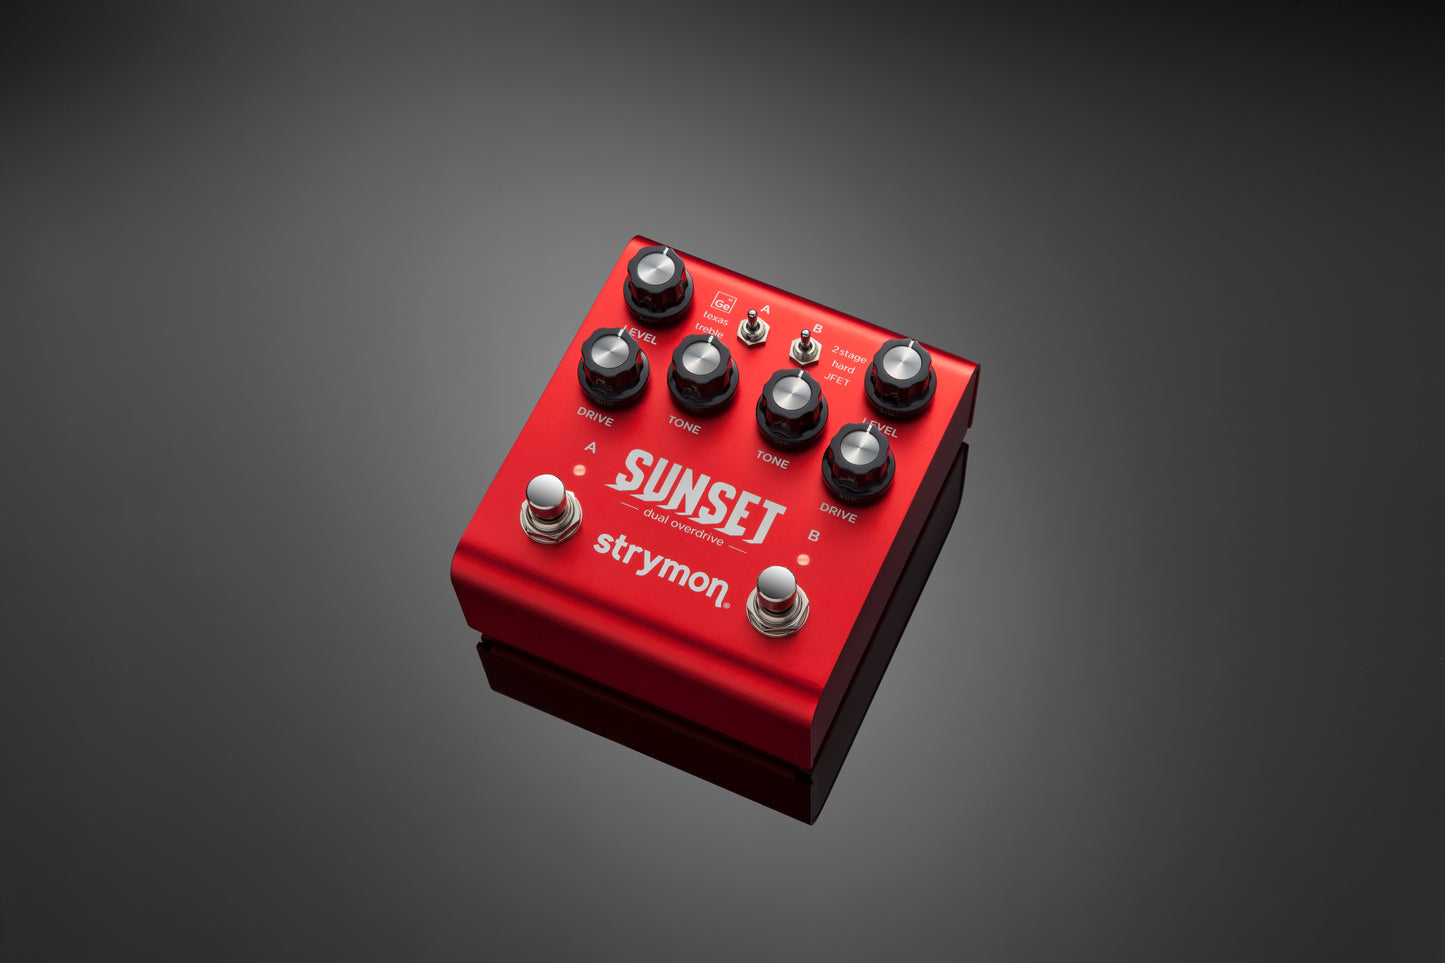 Strymon Sunset Dual Overdrive Pedal -Red, NEW